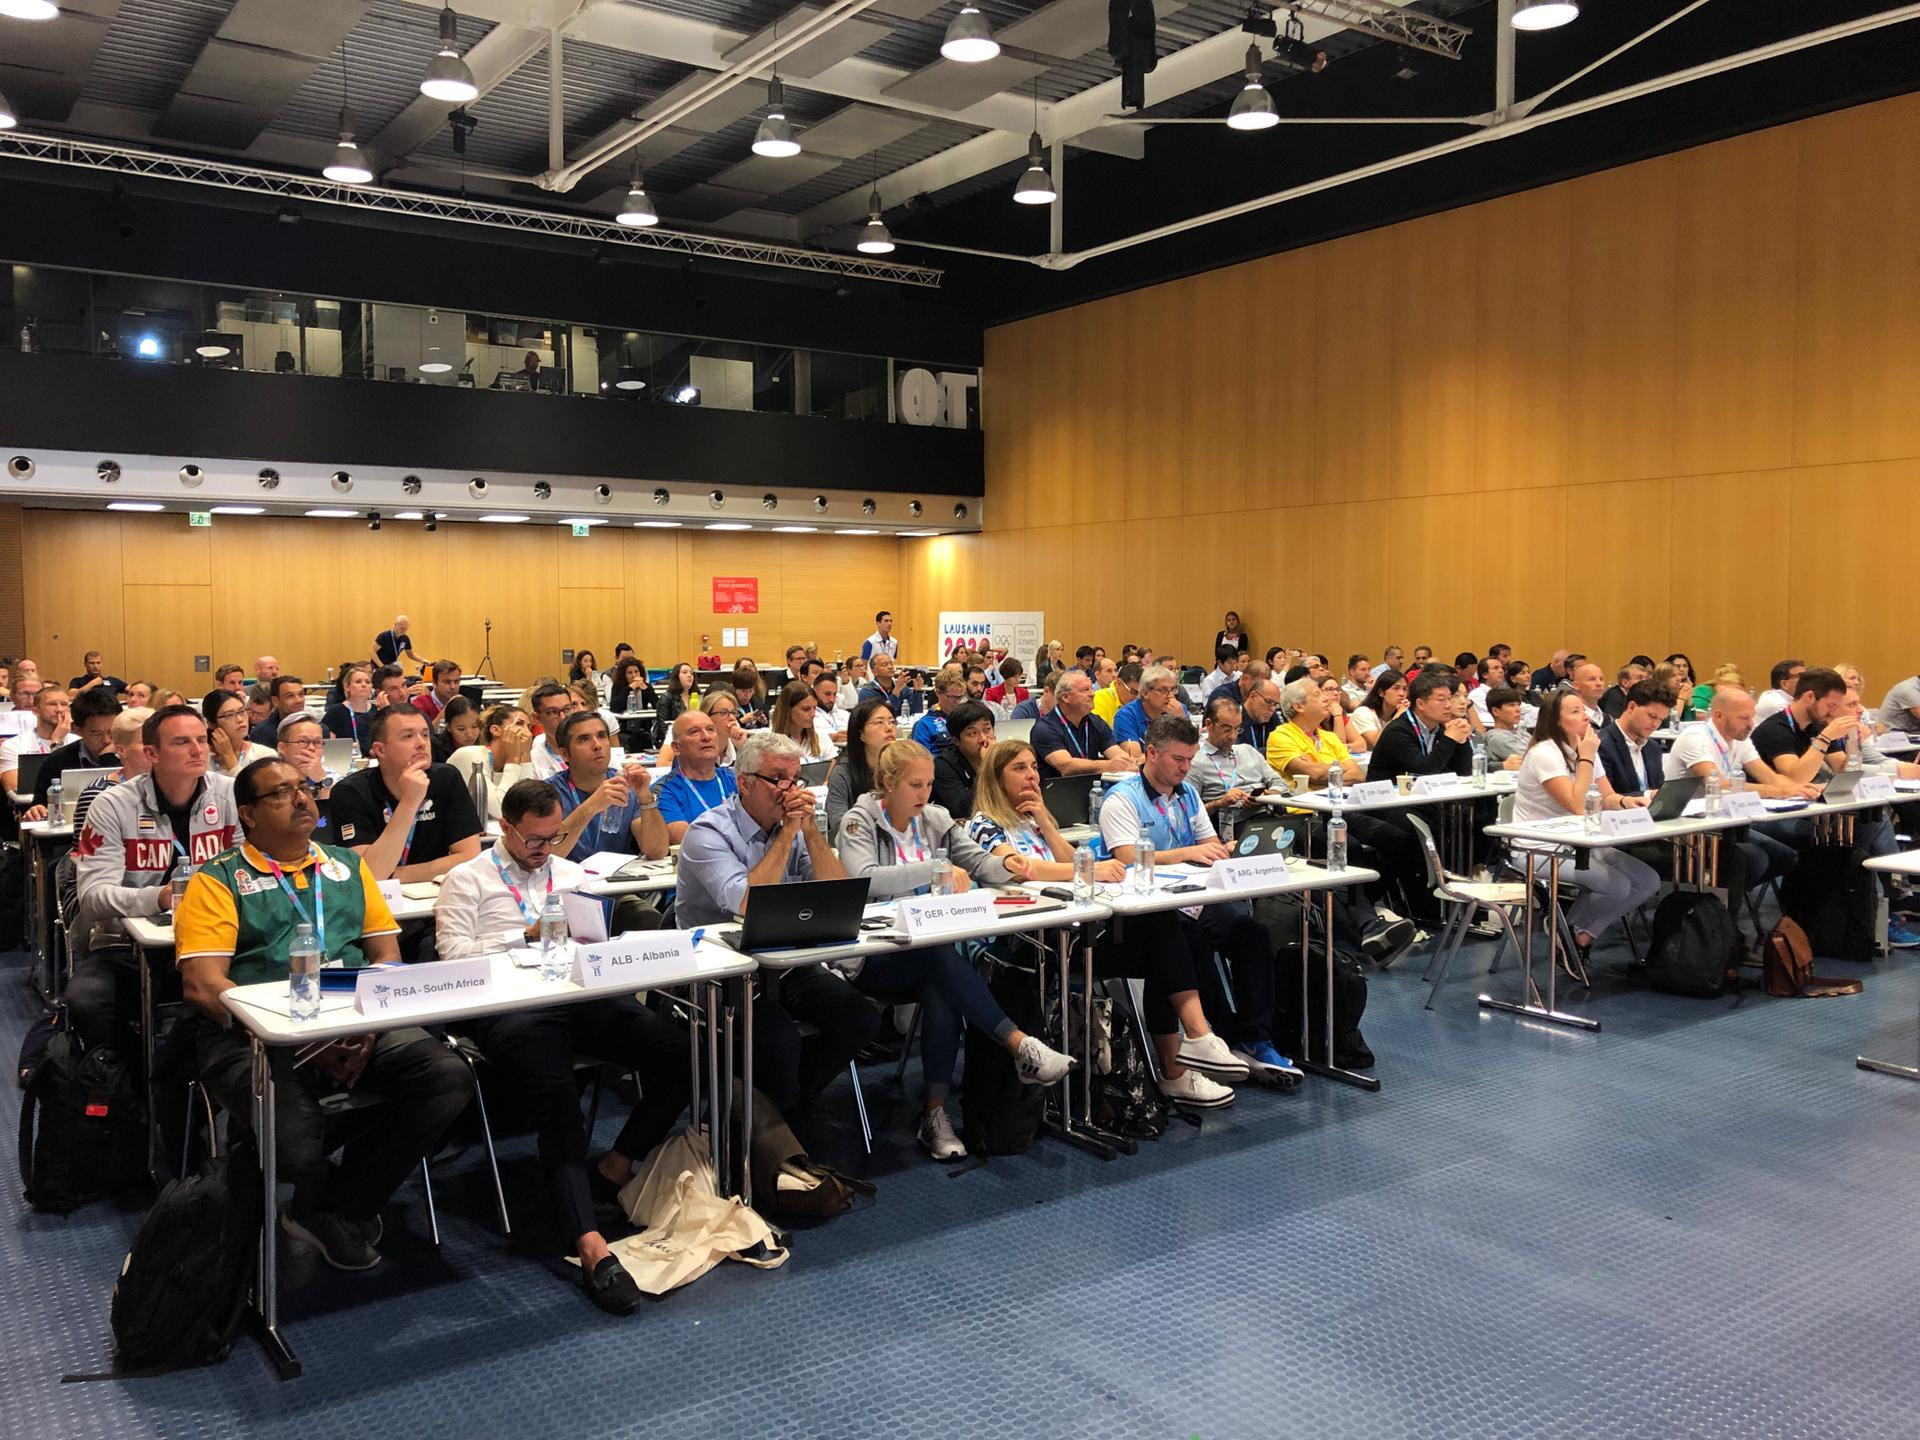 The Chef de Mission seminar offered NOC representatives a last chance to inspect preparations before the start of the Games ©Lausanne 2020